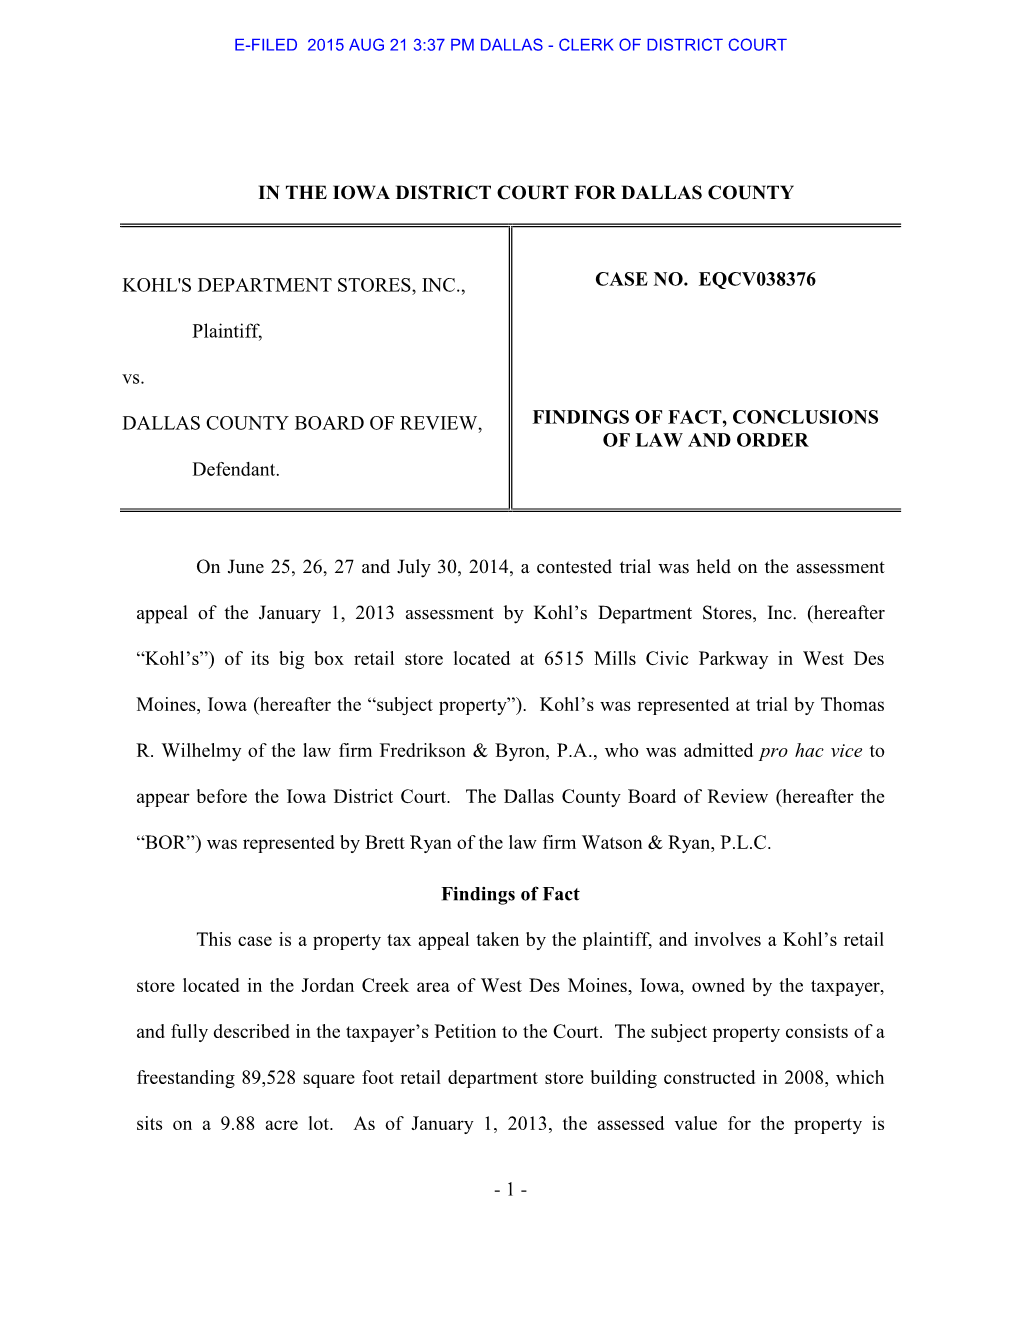 Kohl's V Dallas County, IA Board of Review Court Decision